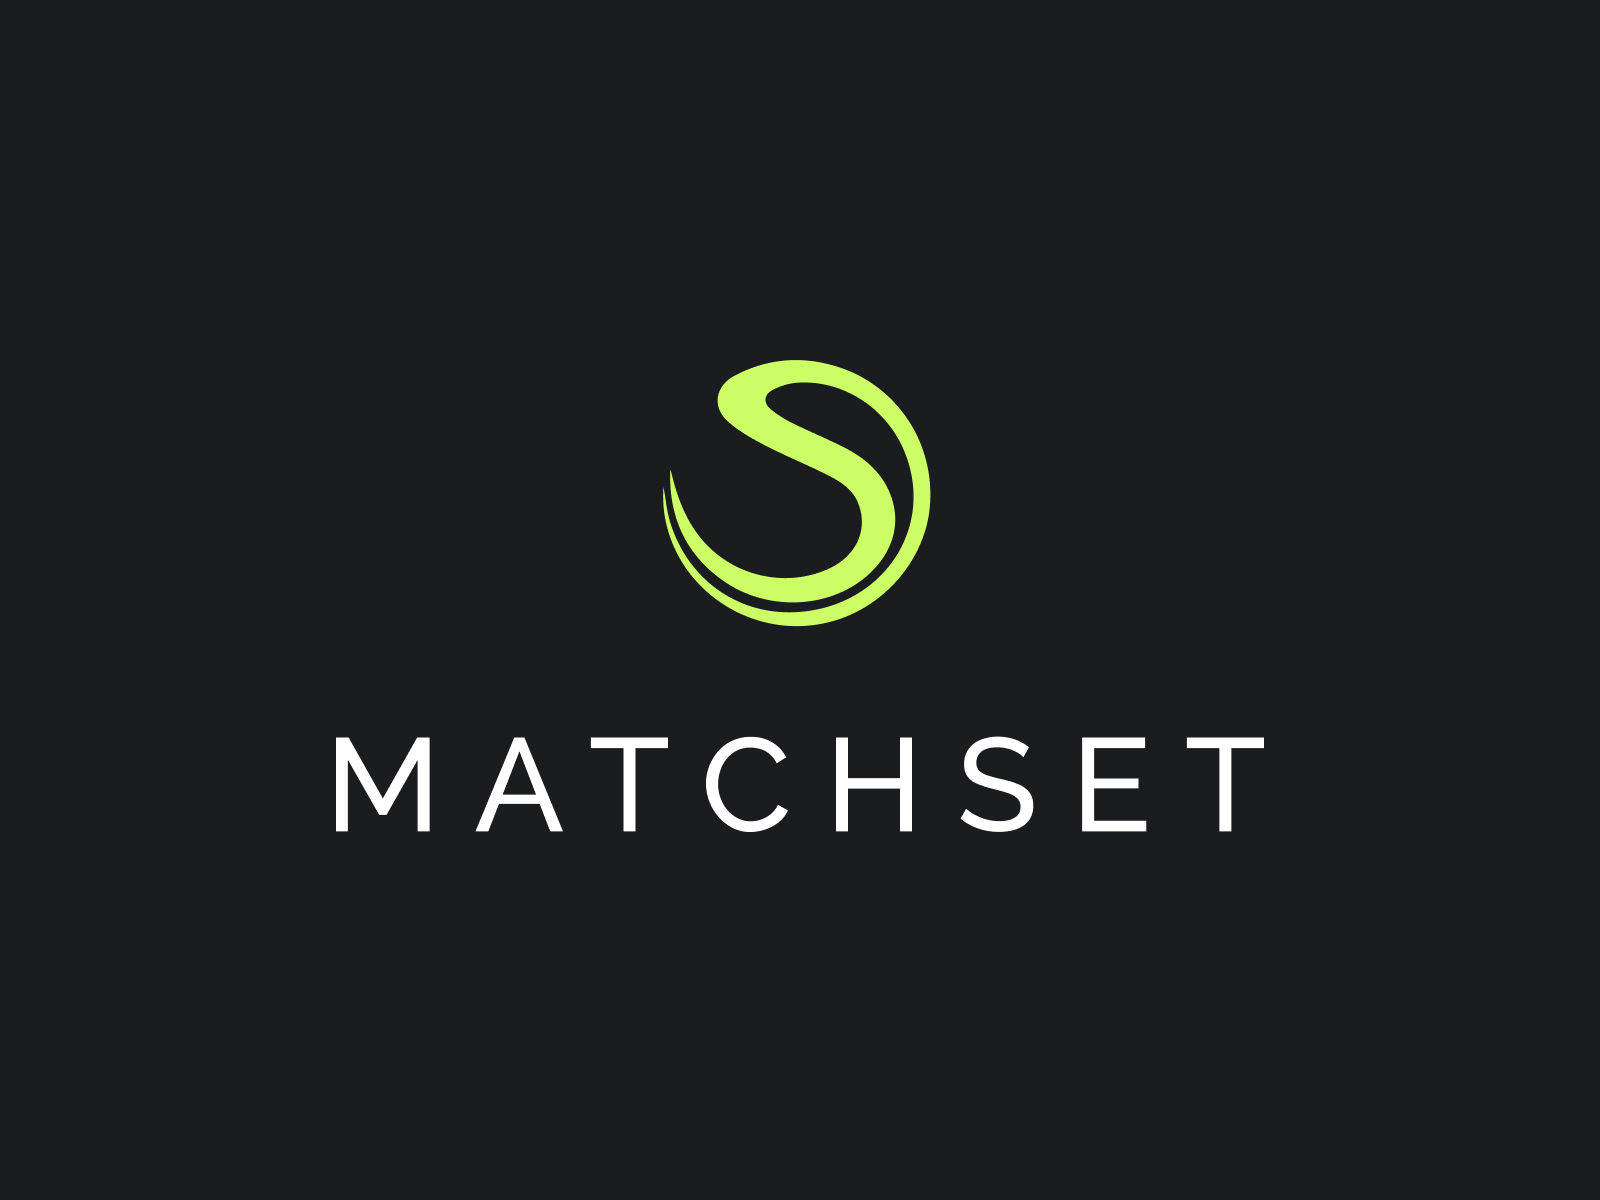 Matchset Logo by LifeQuest on Dribbble